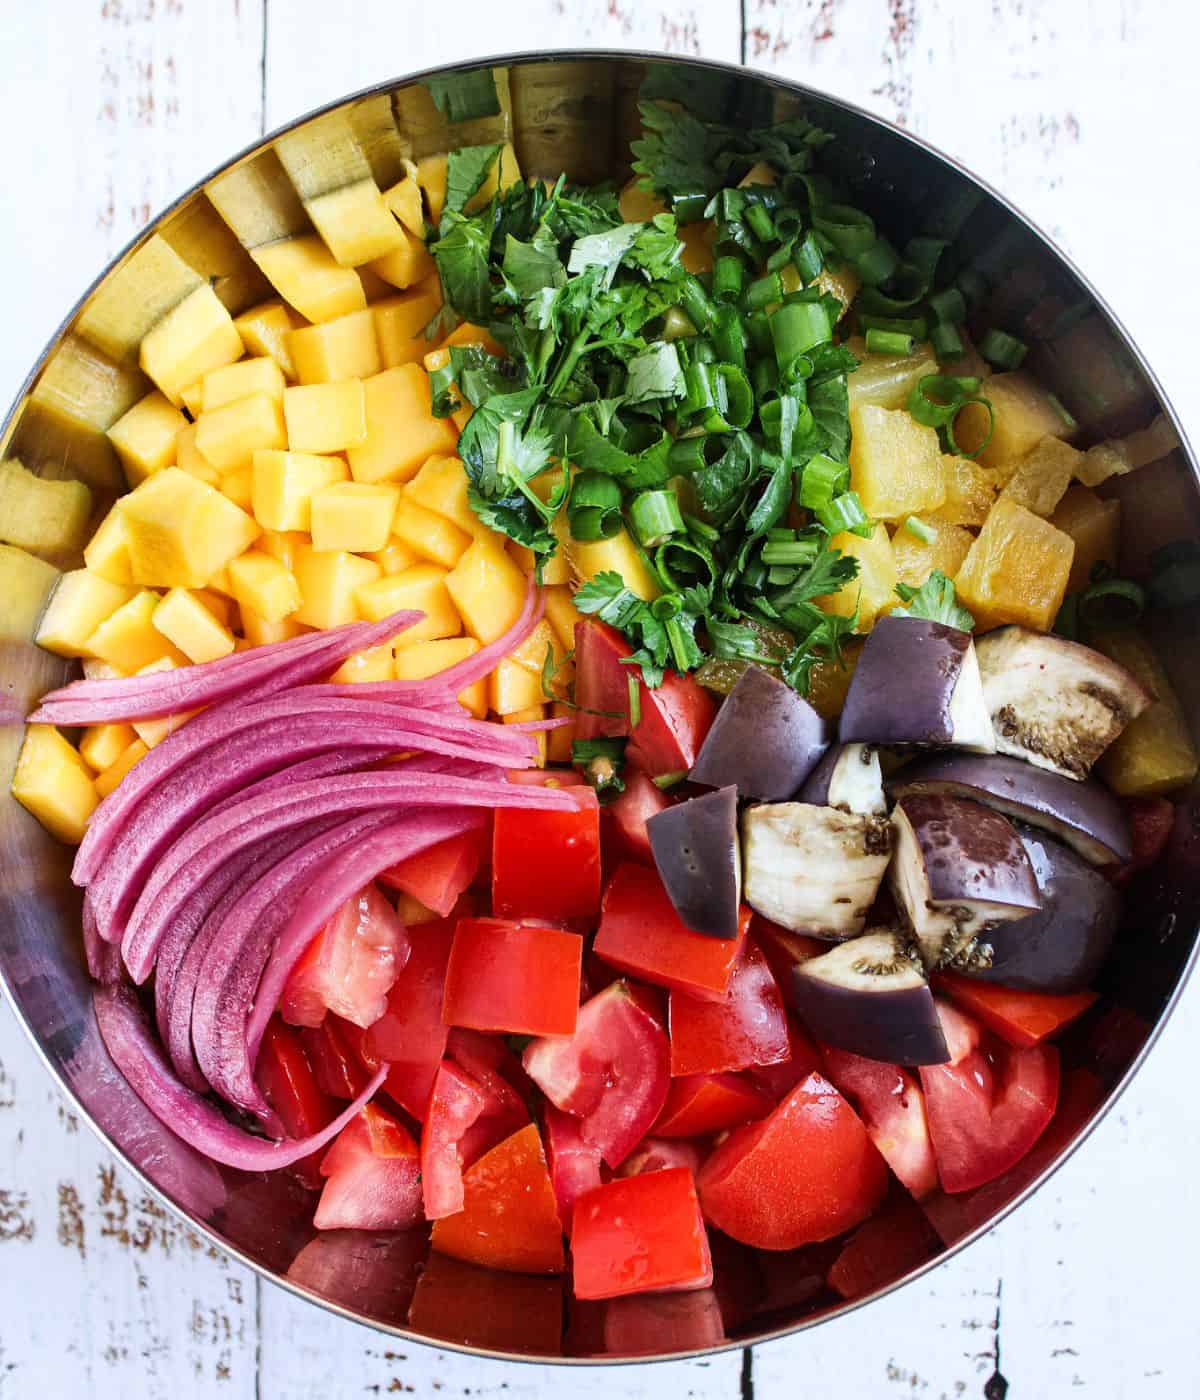 Mango, pineapple, tomatoes, red onions, cilantro and green onions in a bowl.